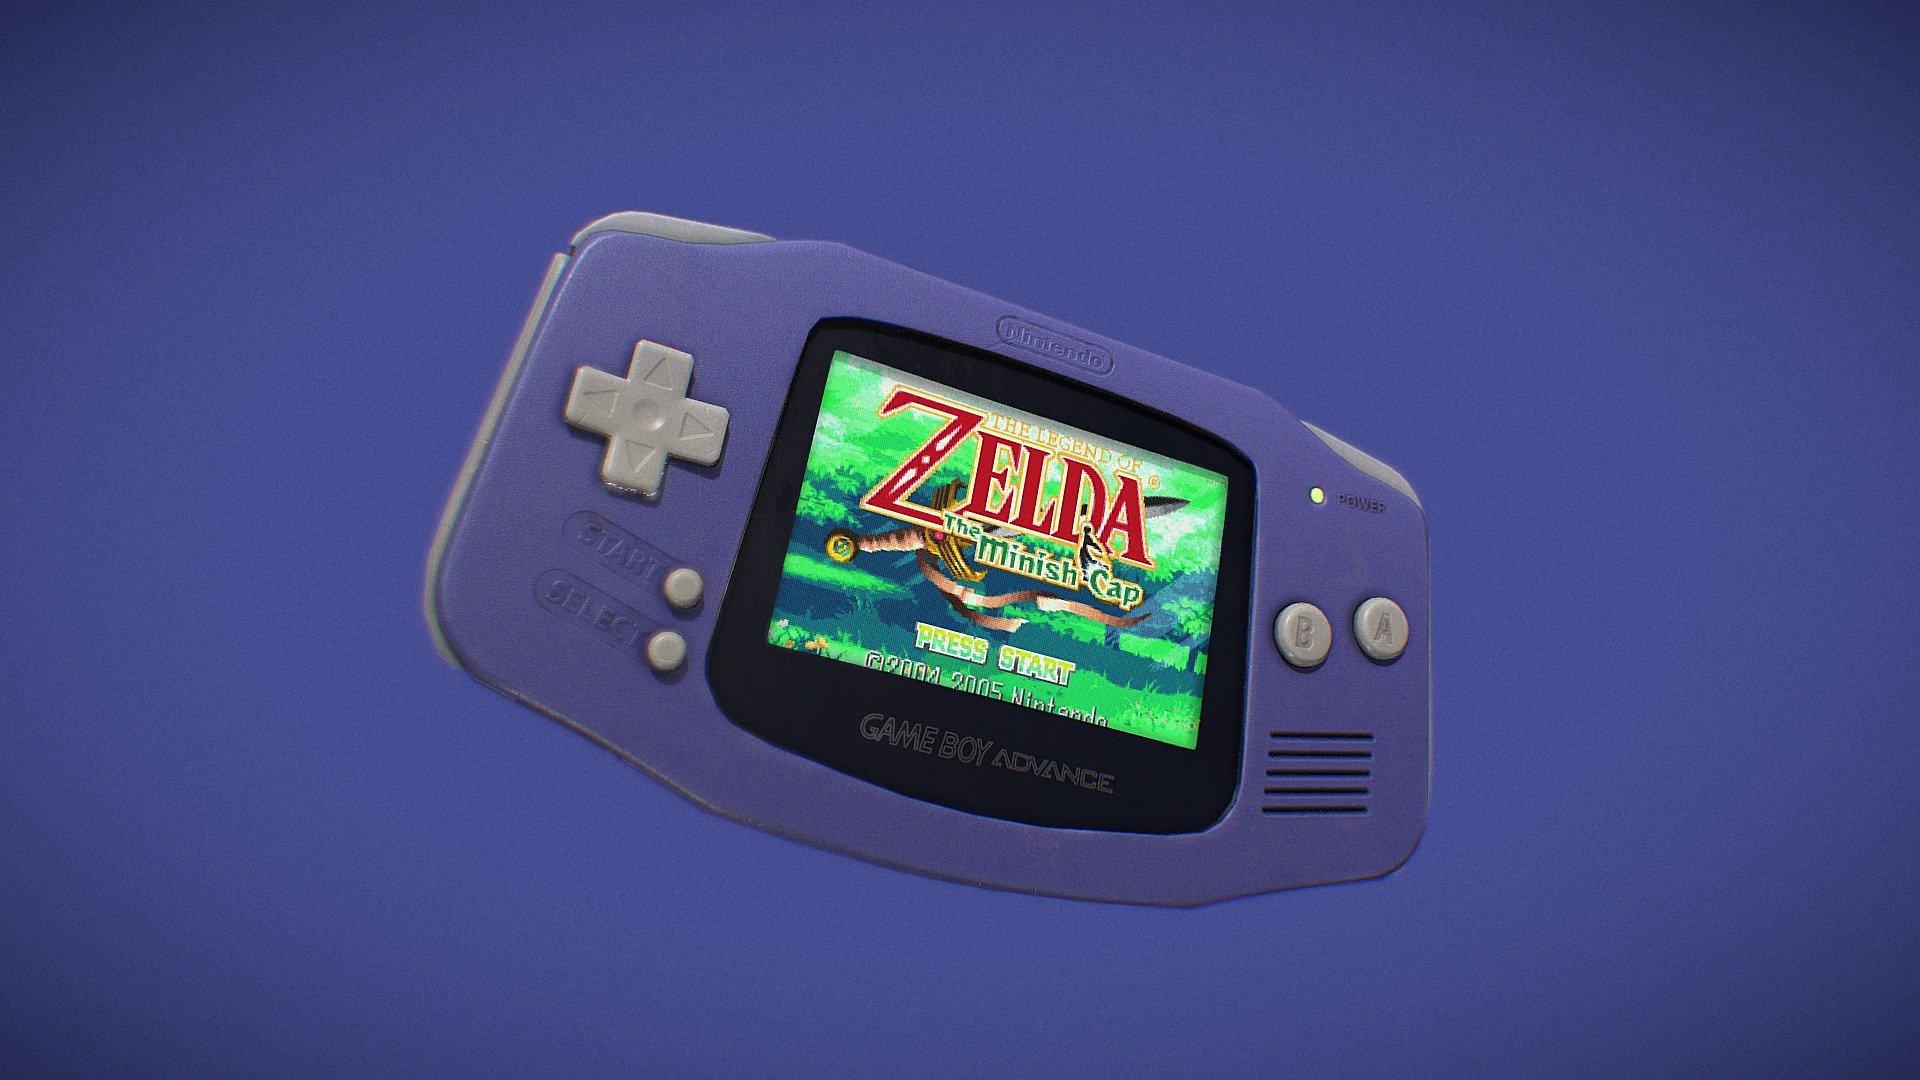 A Game ready version of Nintedo's iconic GameBoy Advance. Texturing was done in Photoshop and Substance Painter. The modeling was done in both Maya and Blender.

1 set of 4K textures for the entire console itself. This includes albedo, metallic, roughness, normals, emission, opacity and AO.
Then there is also a 2k texture used to cycle through the frames on the GameBoy's screen. These can be interchanged or totally replaced 3d model